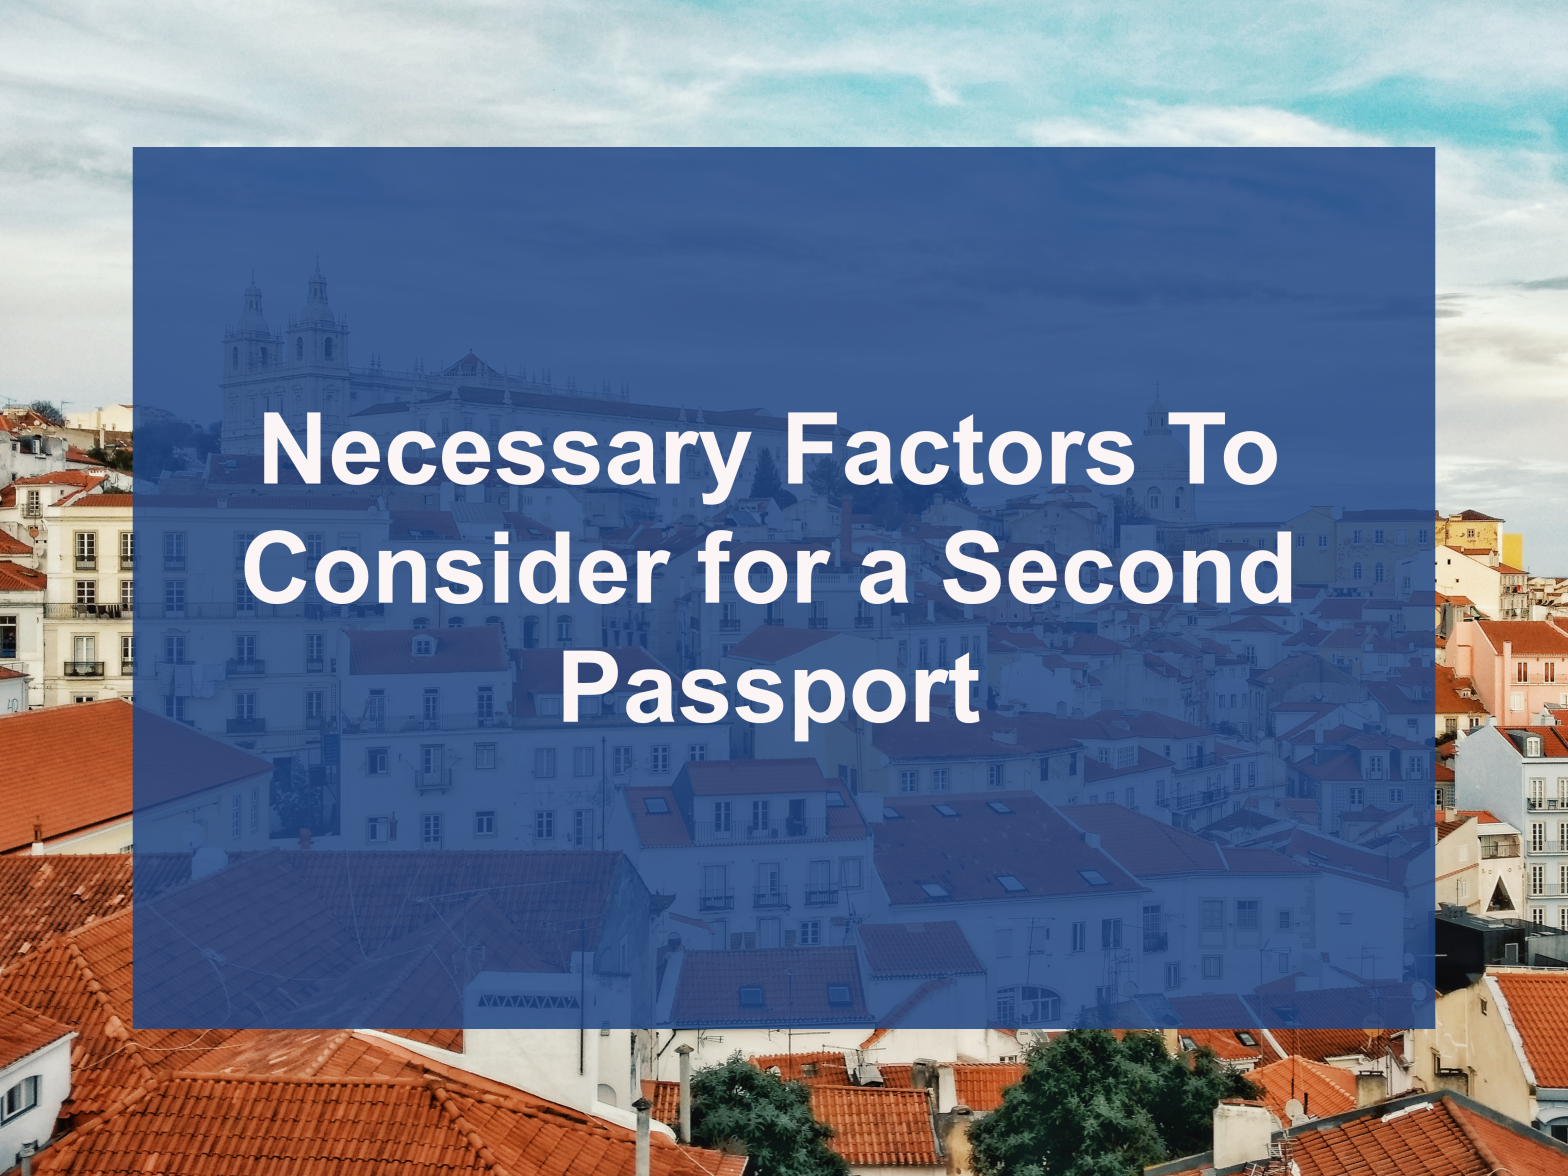 Get to Know About Necessary Factors for Second Passport by 7 Sky Immigration